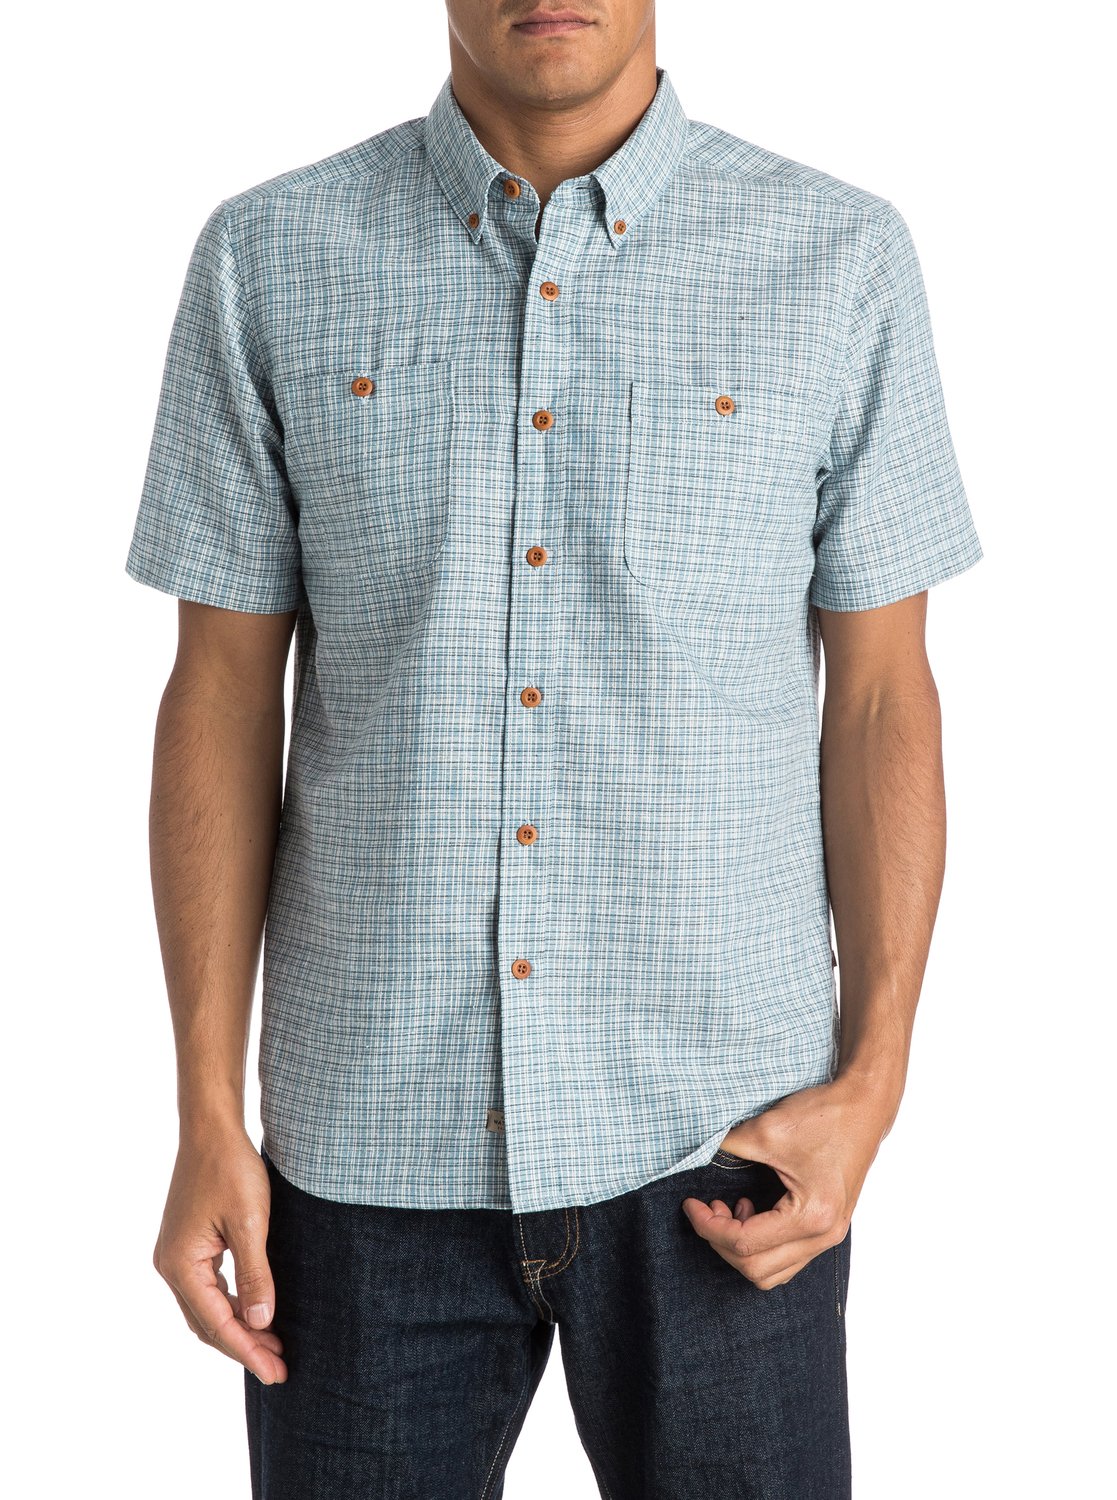 Waterman Fully Calibrated Short Sleeve Shirt AQMWT03243 | Quiksilver